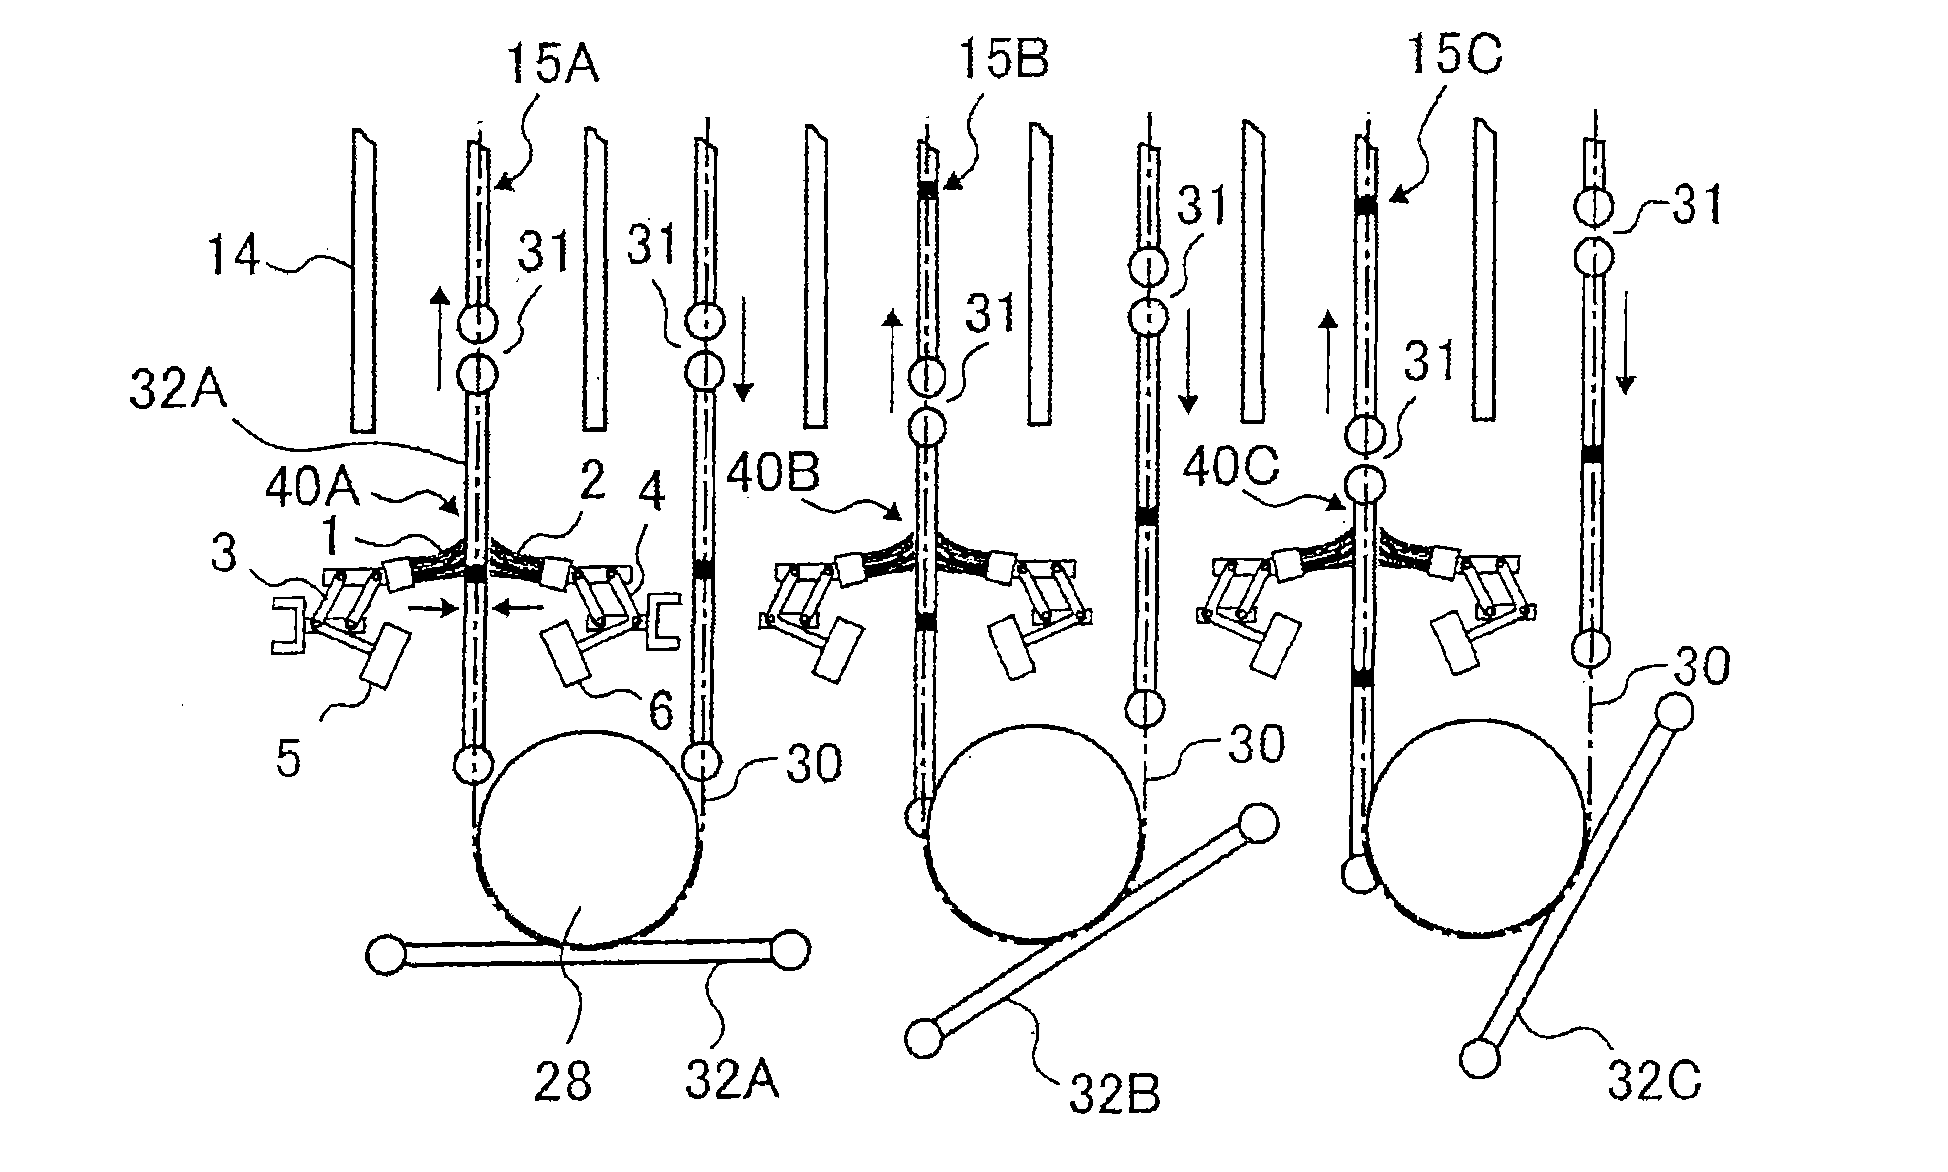 Electric precipitation device and scraping device